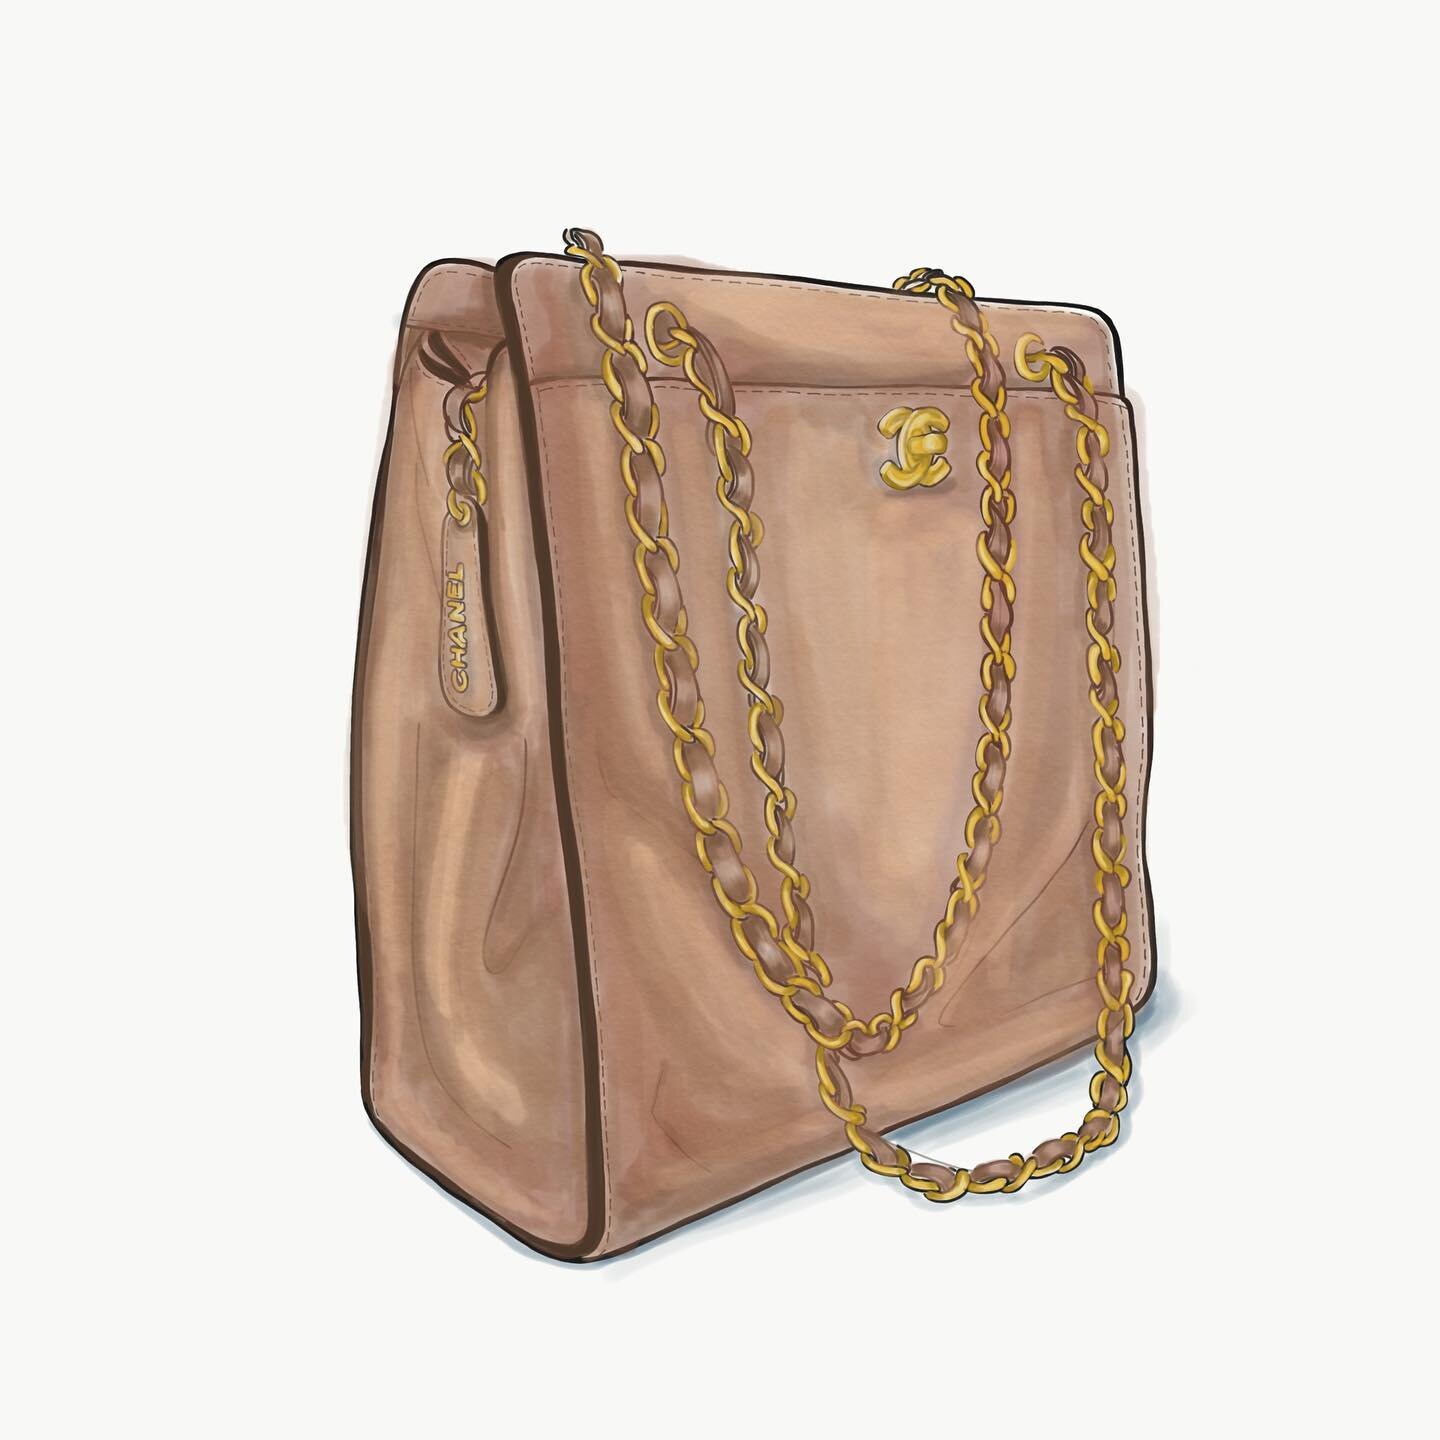 More vintage Chanel appreciation&hellip; I love the orientation of this bag and the front pocket&hellip; and the chain straps that feel like jewelry.
.
.
Sketched on my iPad Pro.
.
.
#vintagechanel #vintagechanelbag #circularfashion #momsclosetfinds?